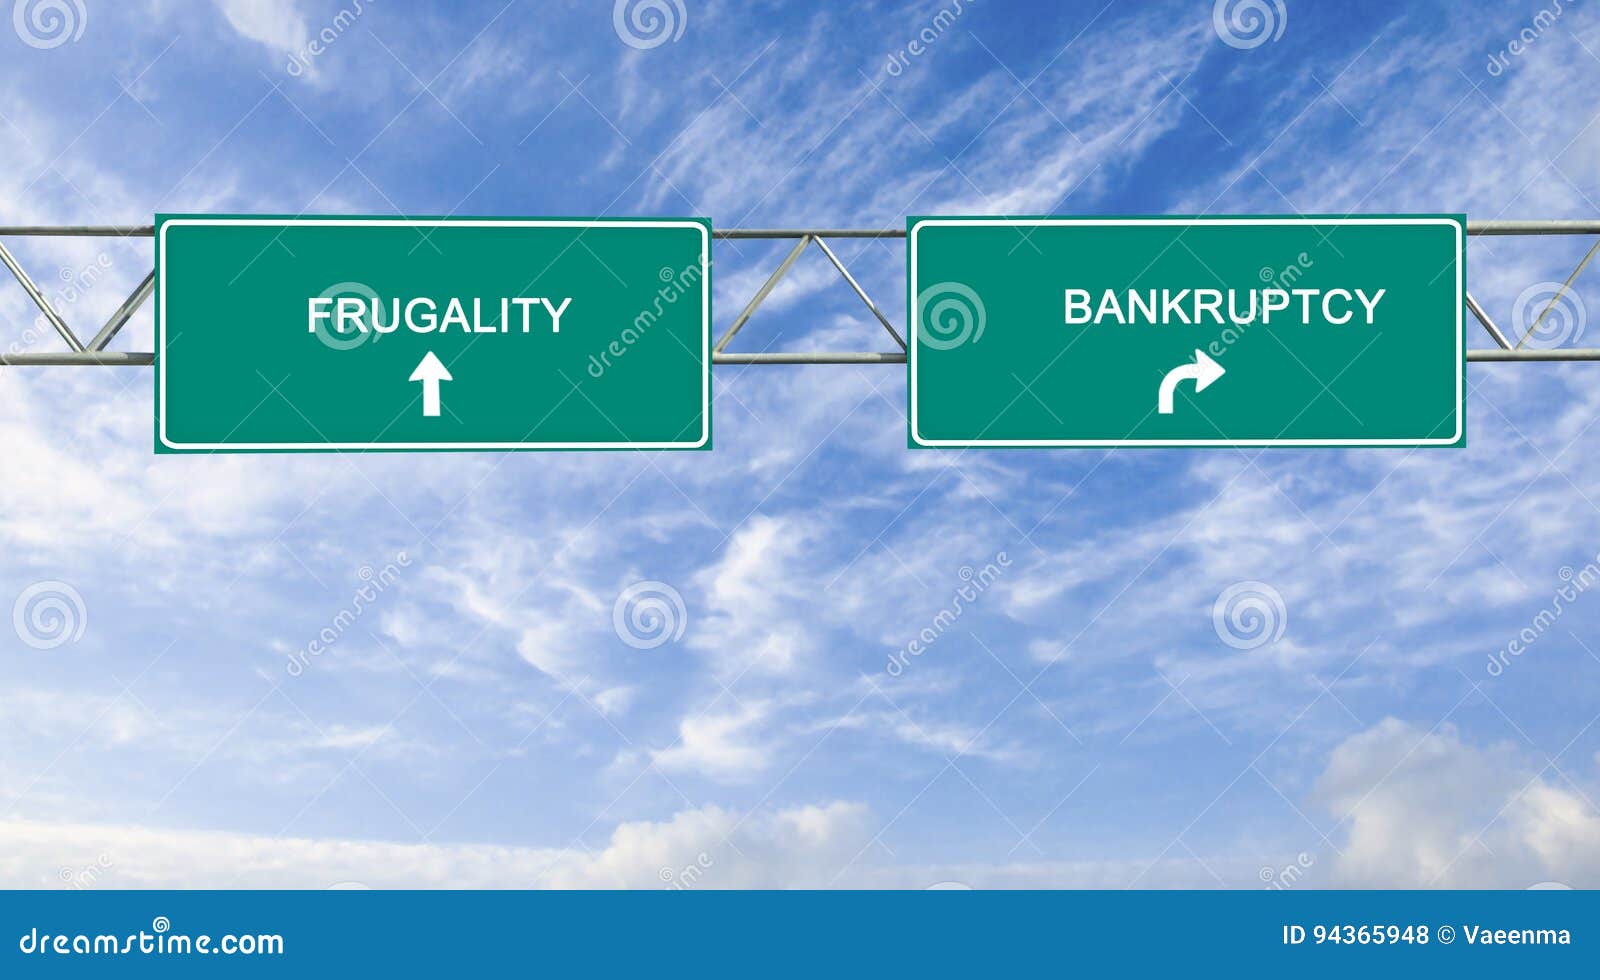 frugality and bankruptcy